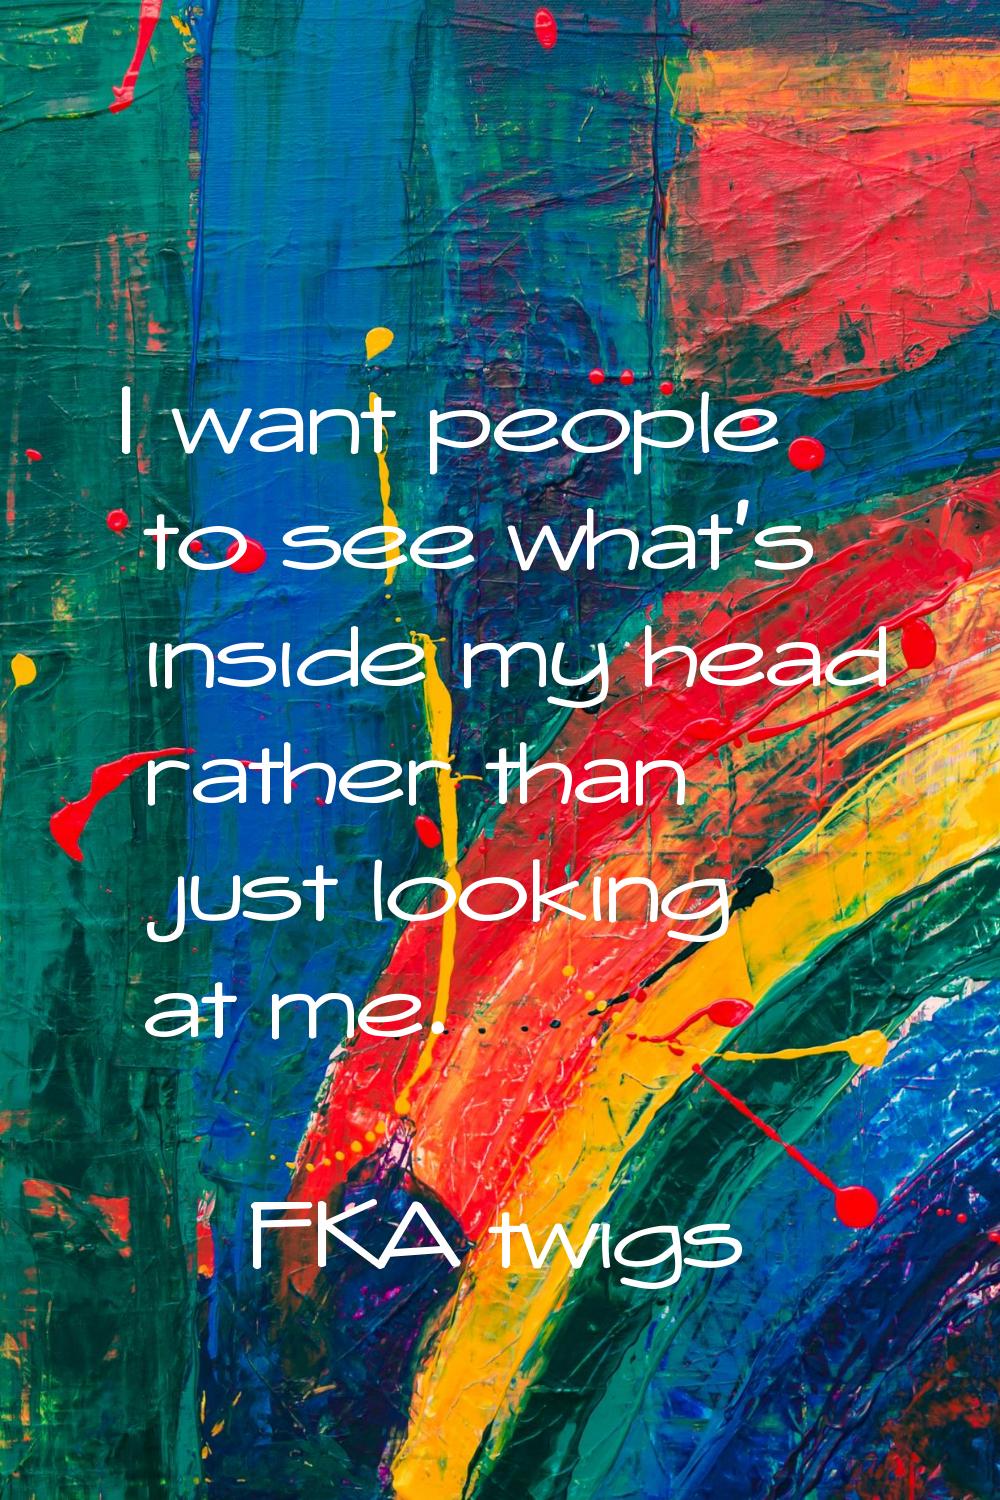 I want people to see what's inside my head rather than just looking at me.